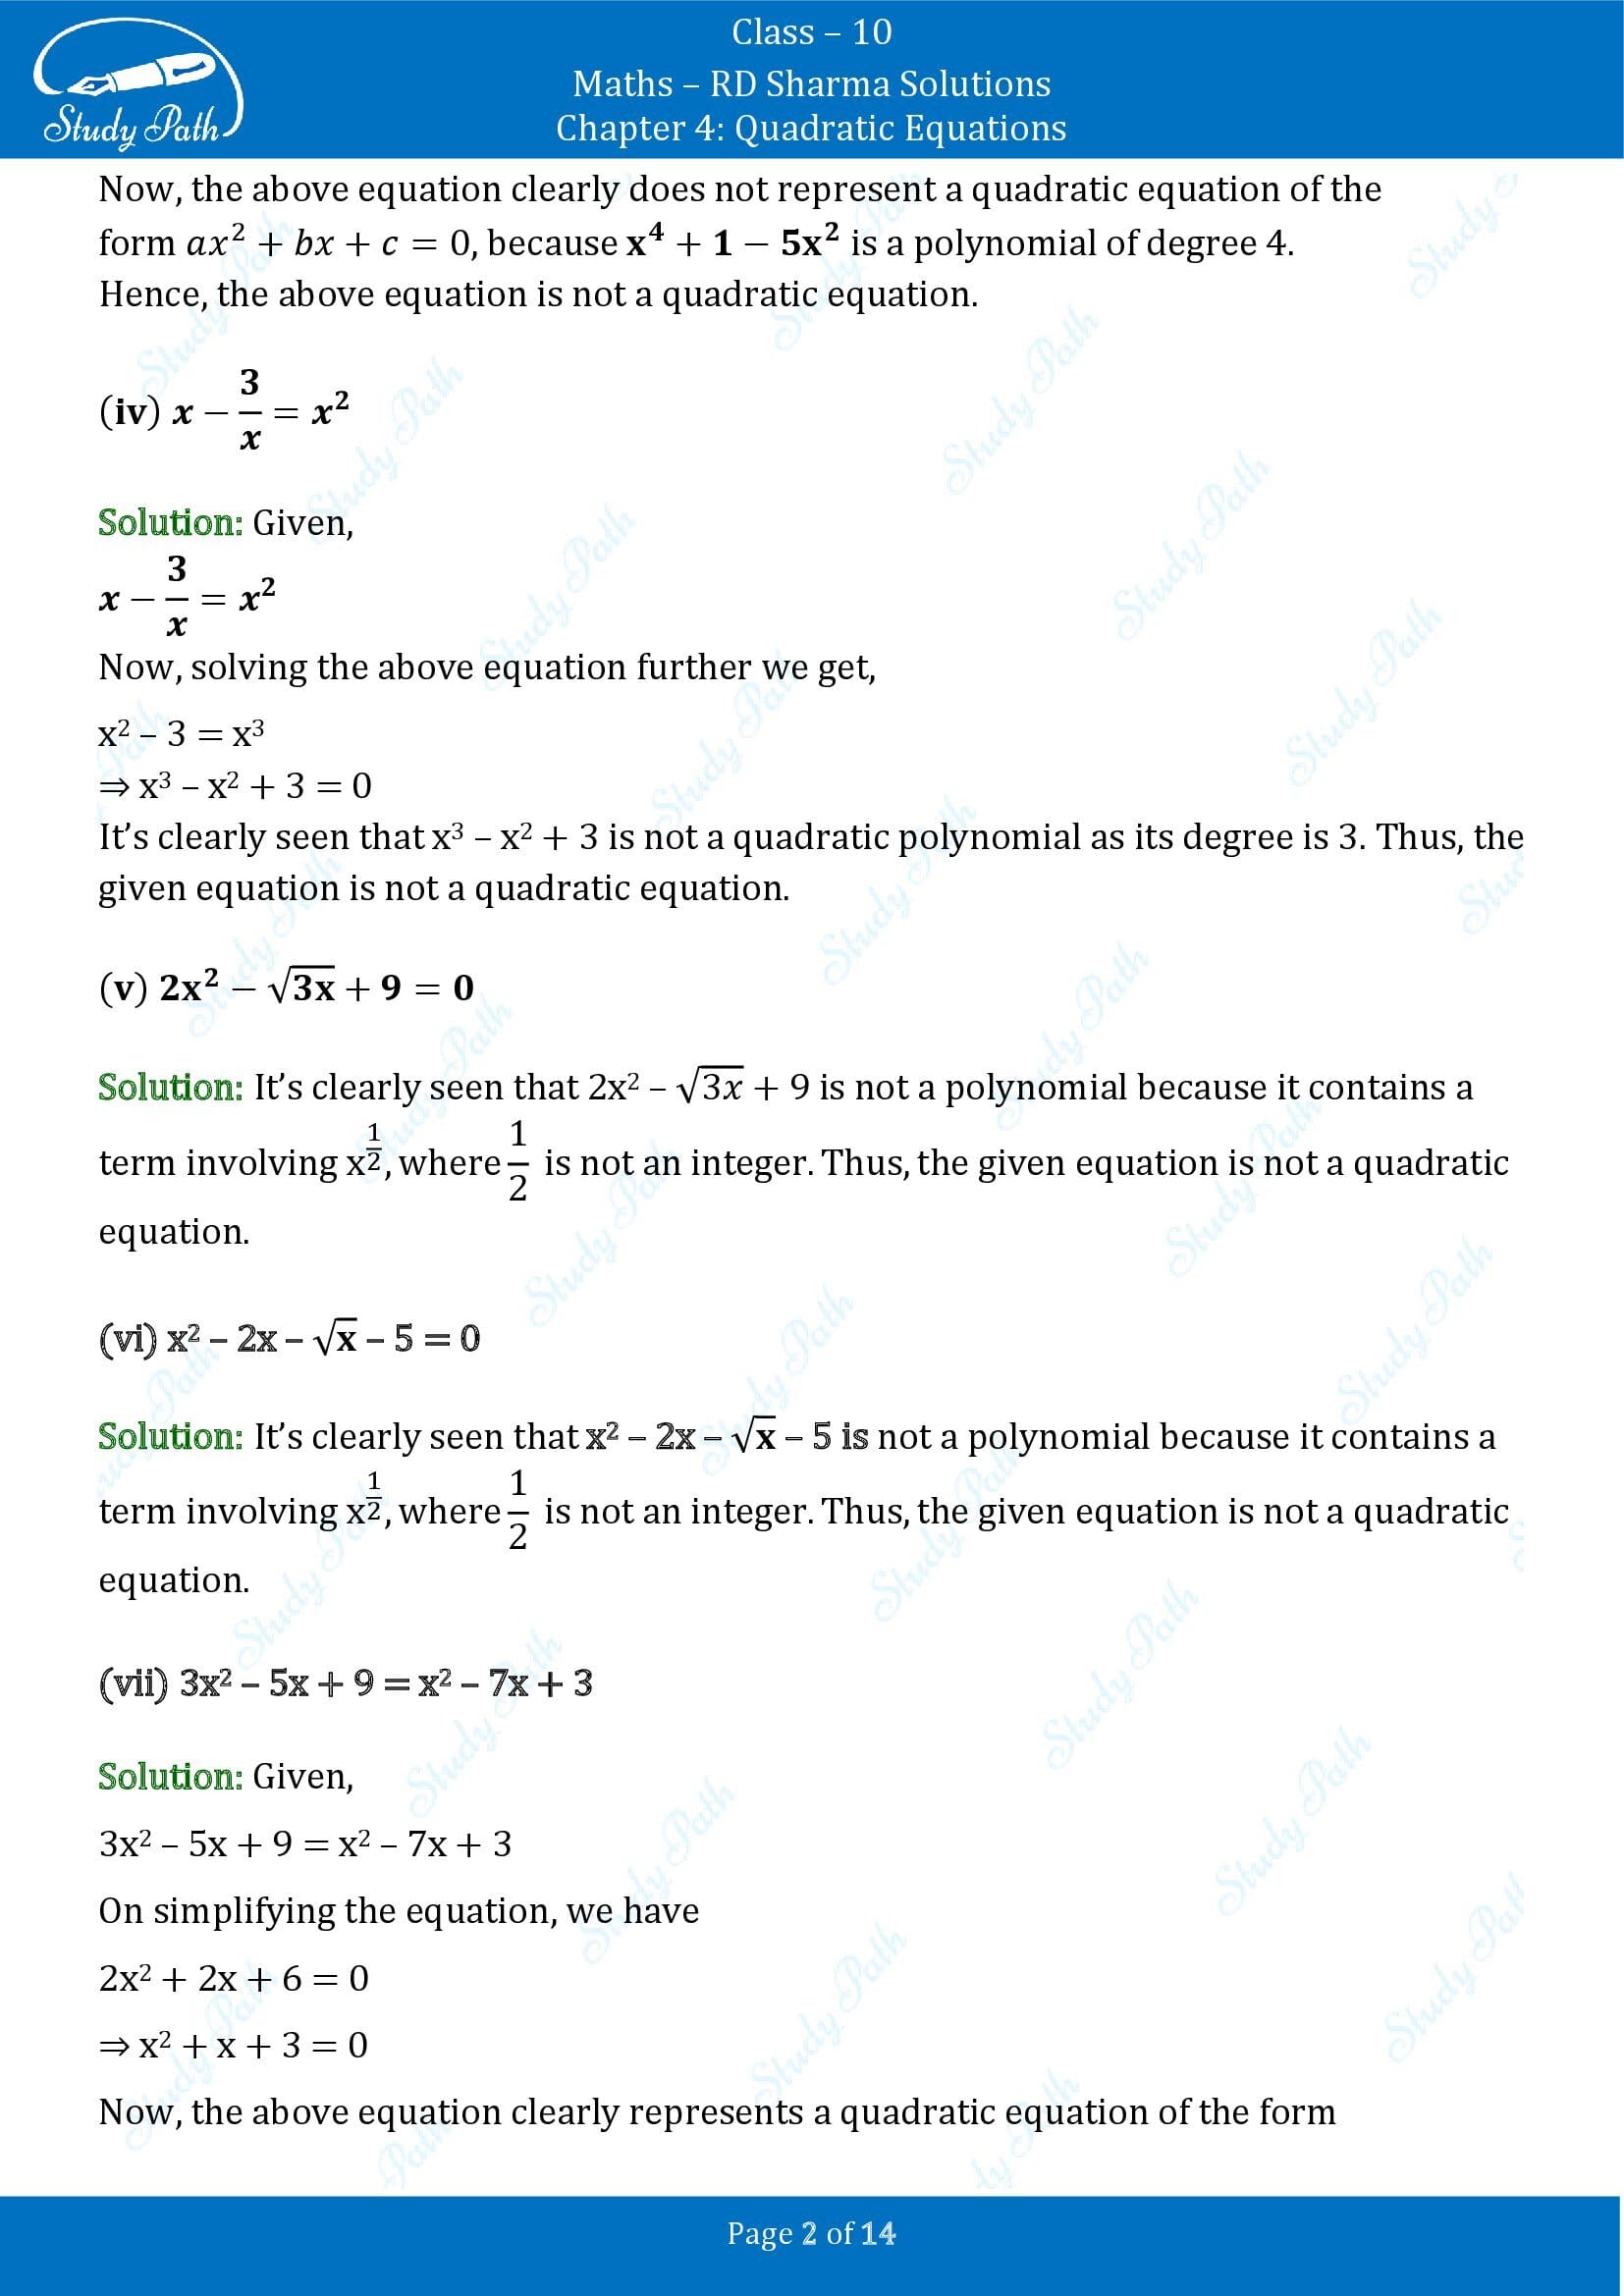 RD Sharma Solutions Class 10 Chapter 4 Quadratic Equations Exercise 4.1 00002